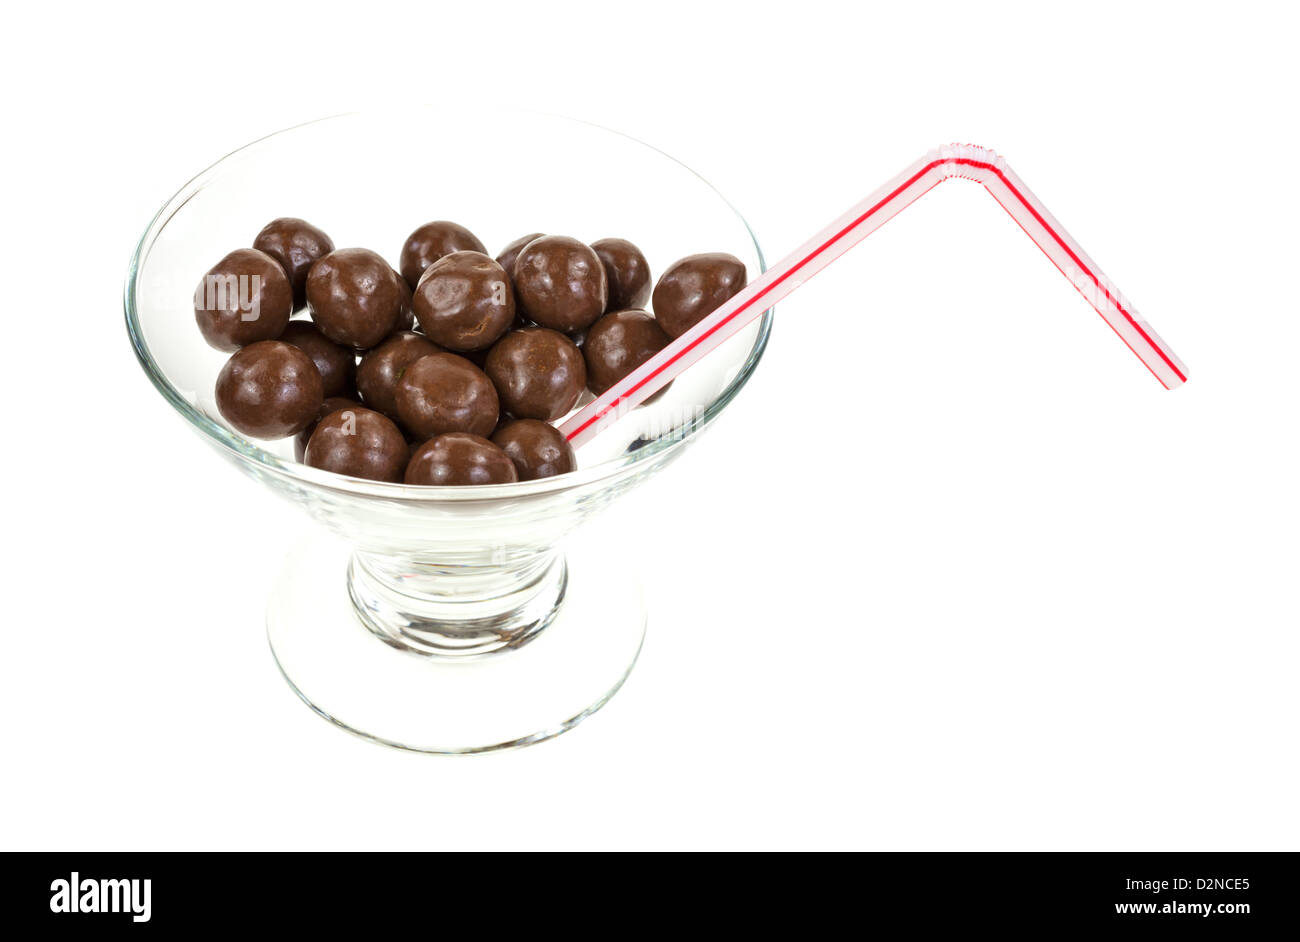 A cocktail glass with milk chocolate balls and a straw on a white background. Stock Photo